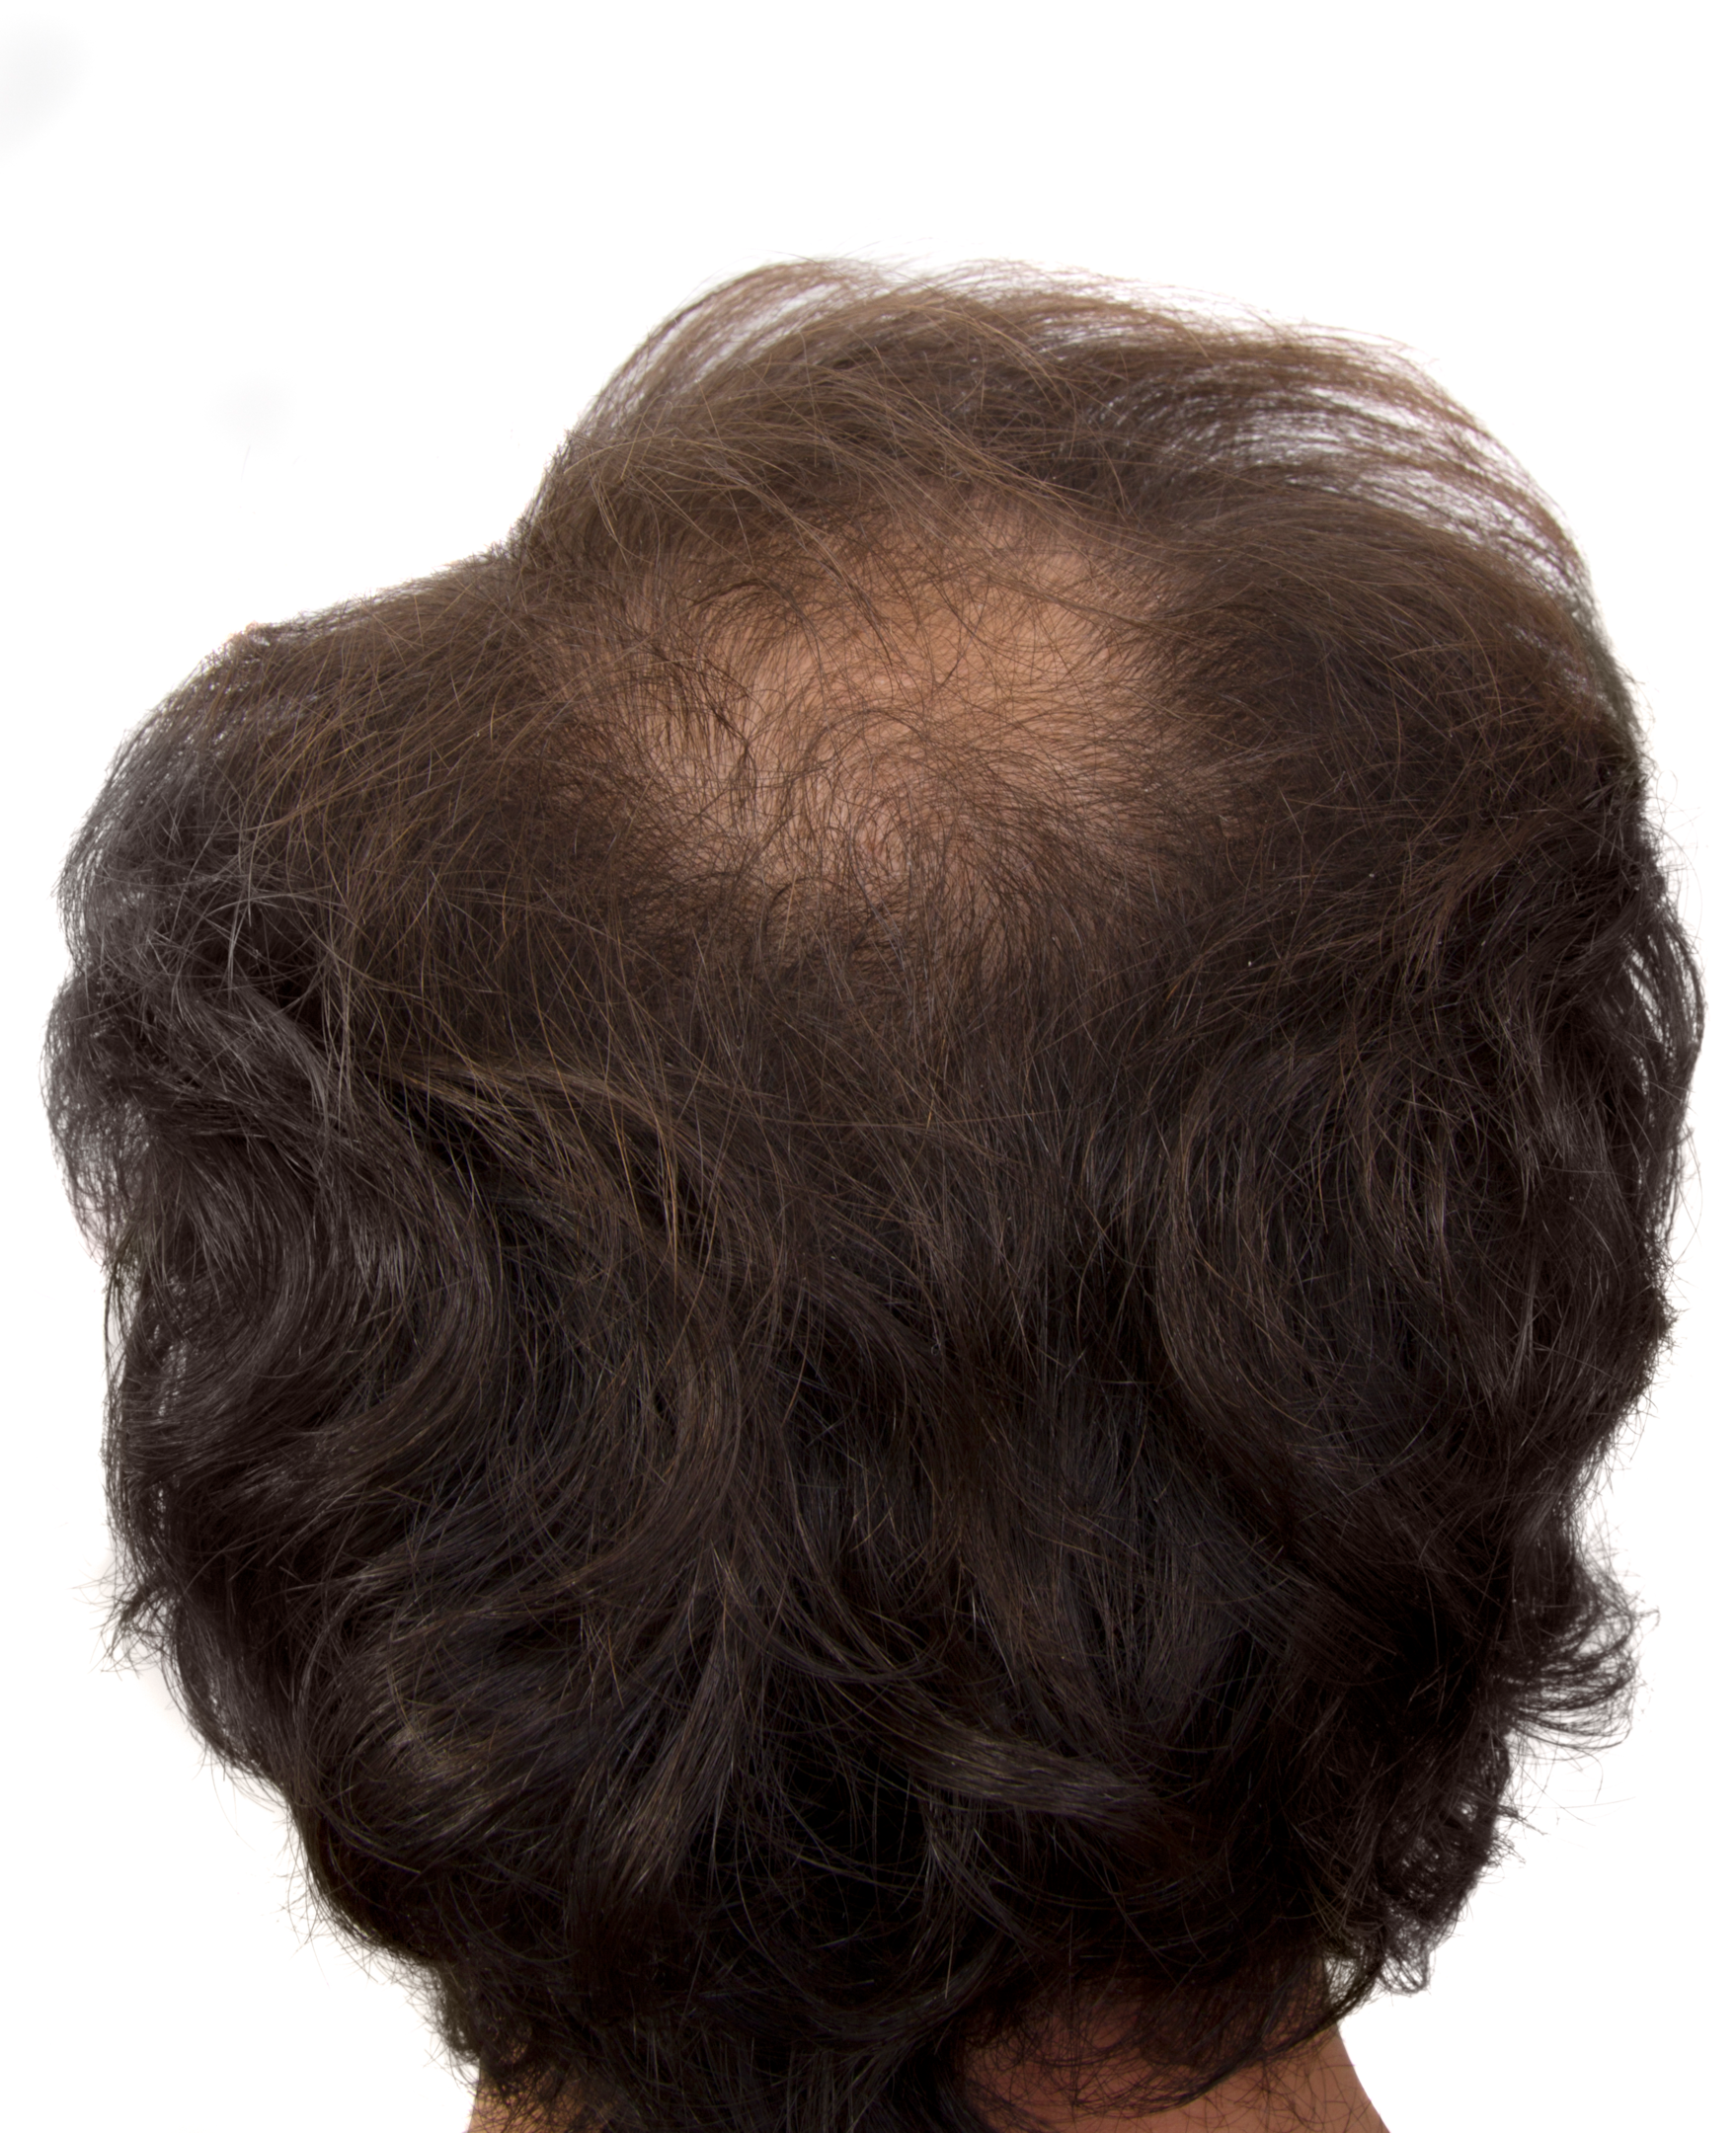 A man with a bald patch on his scalp.